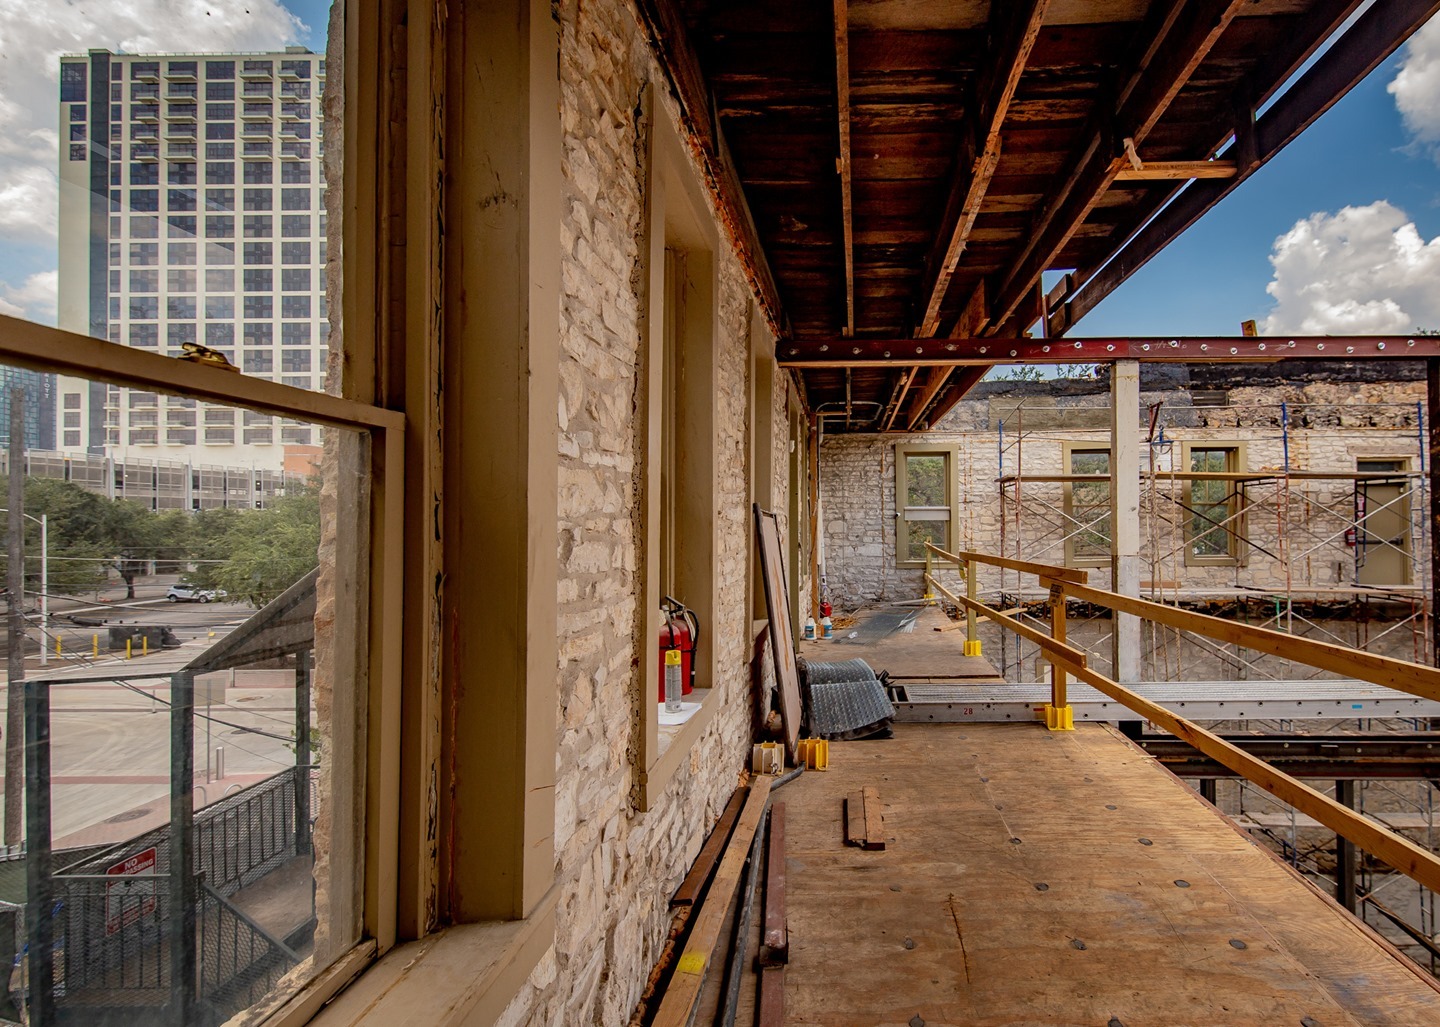 Adaptive reuse of a historic building becomes a whole lotta fun when you get to pop the roof off to make room for a stunning deck with downtown views.⁠
⁠